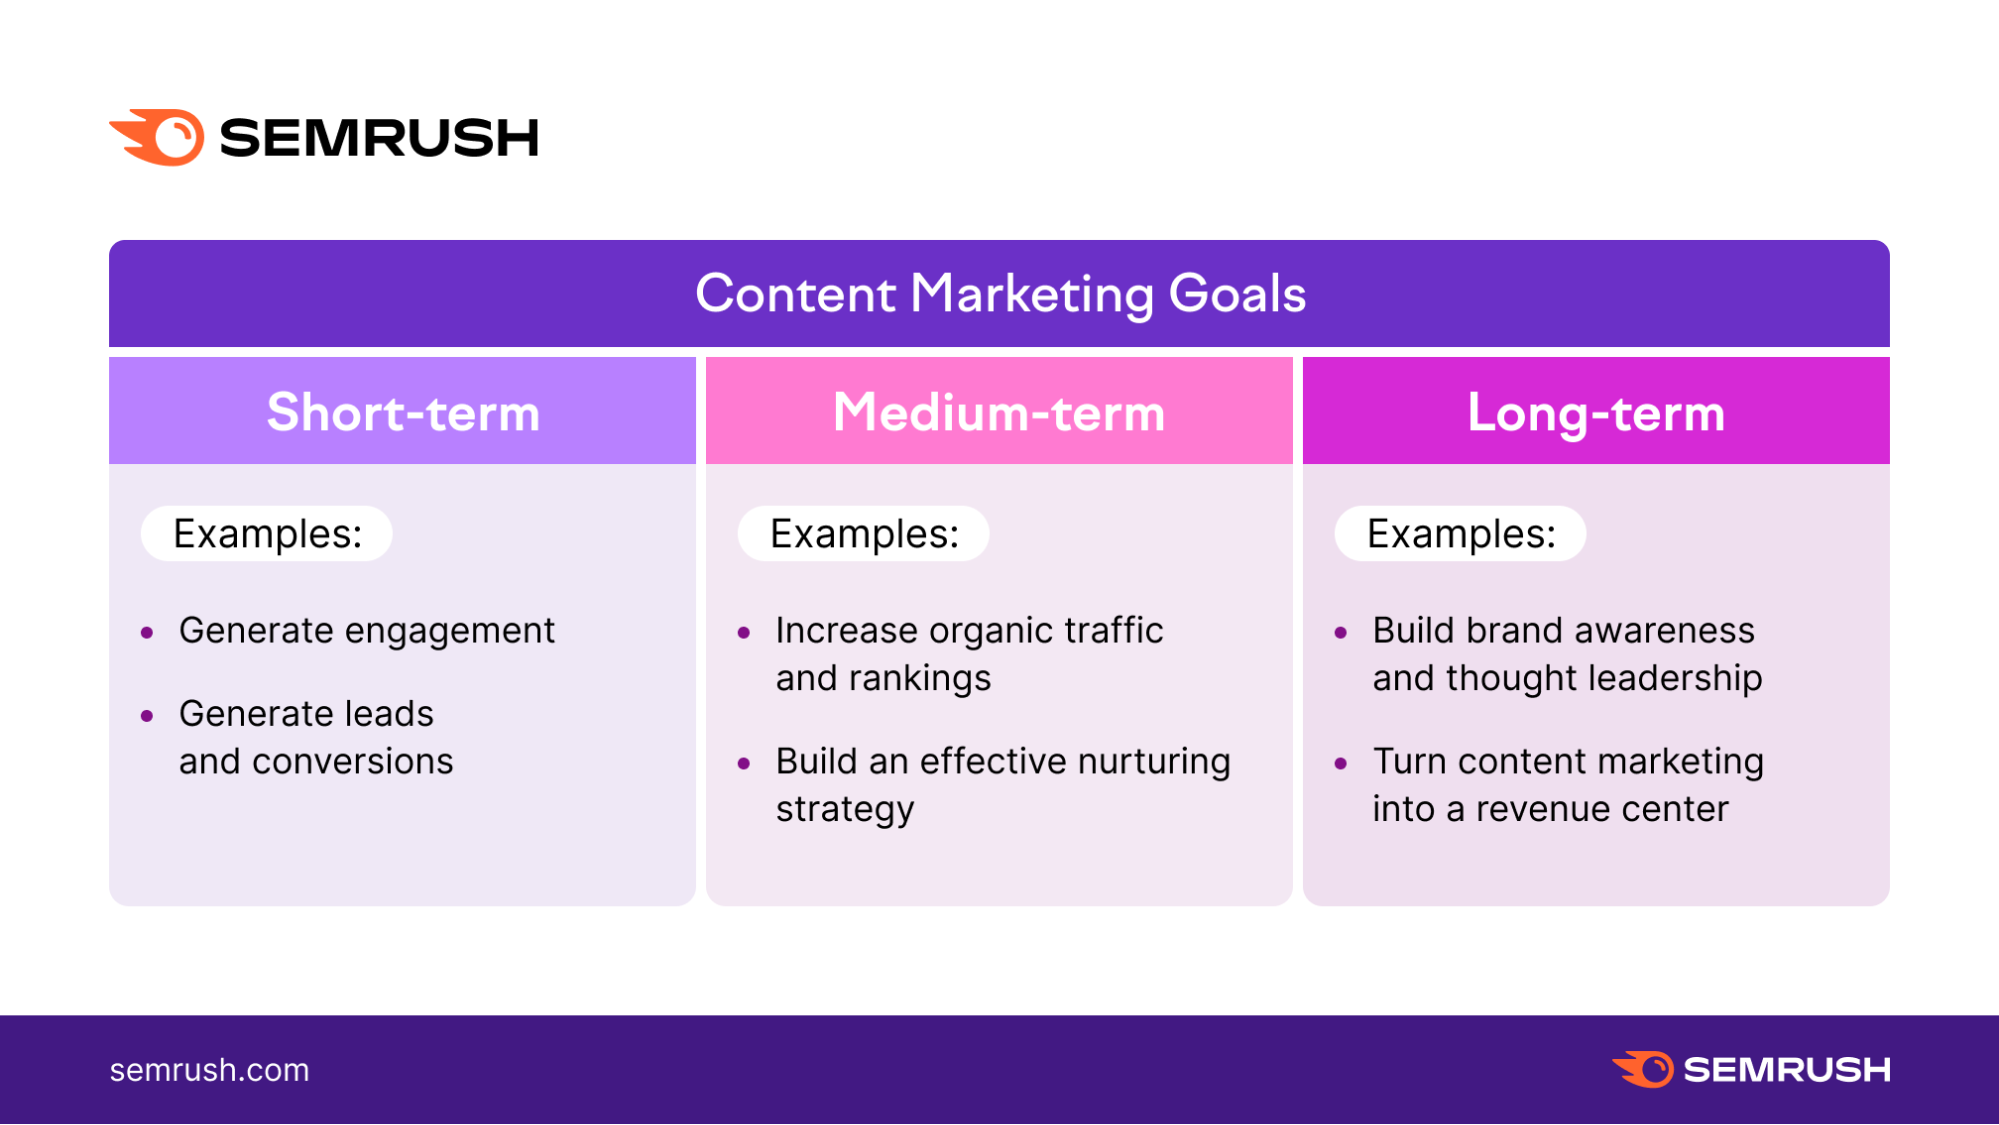 content marketing for small business - different types of content marketing goals